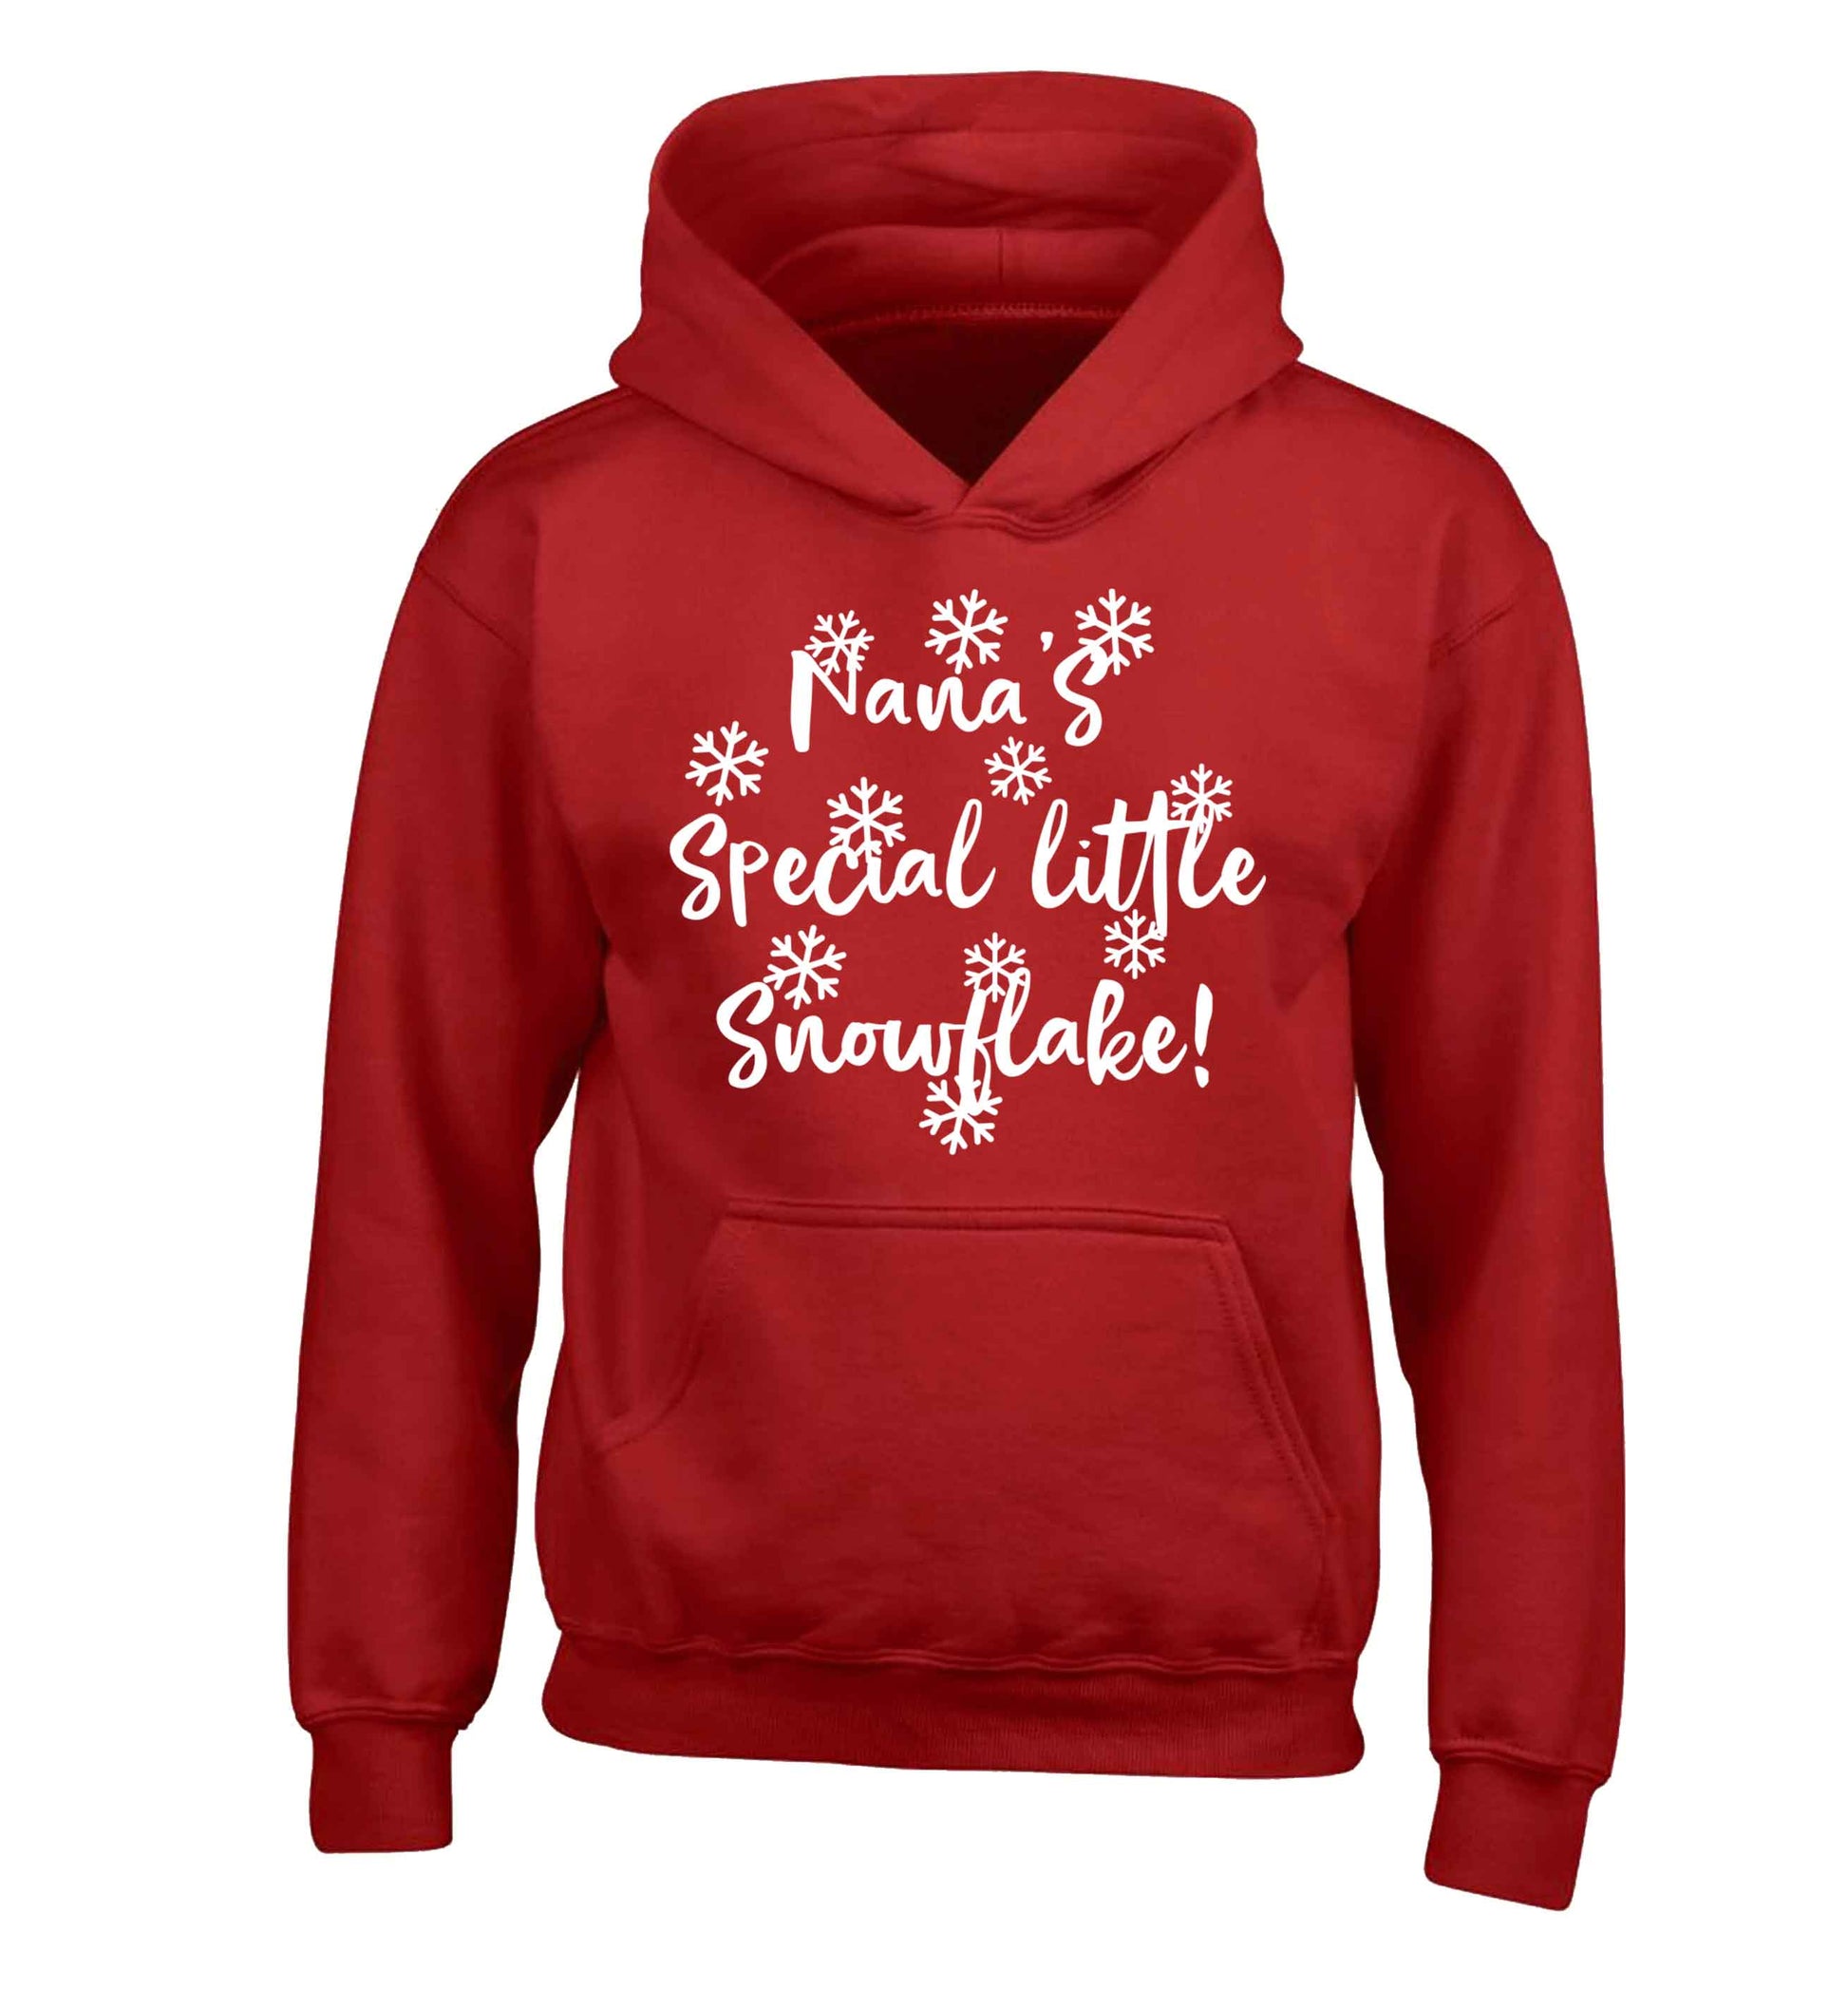 Nana's special little snowflake children's red hoodie 12-13 Years